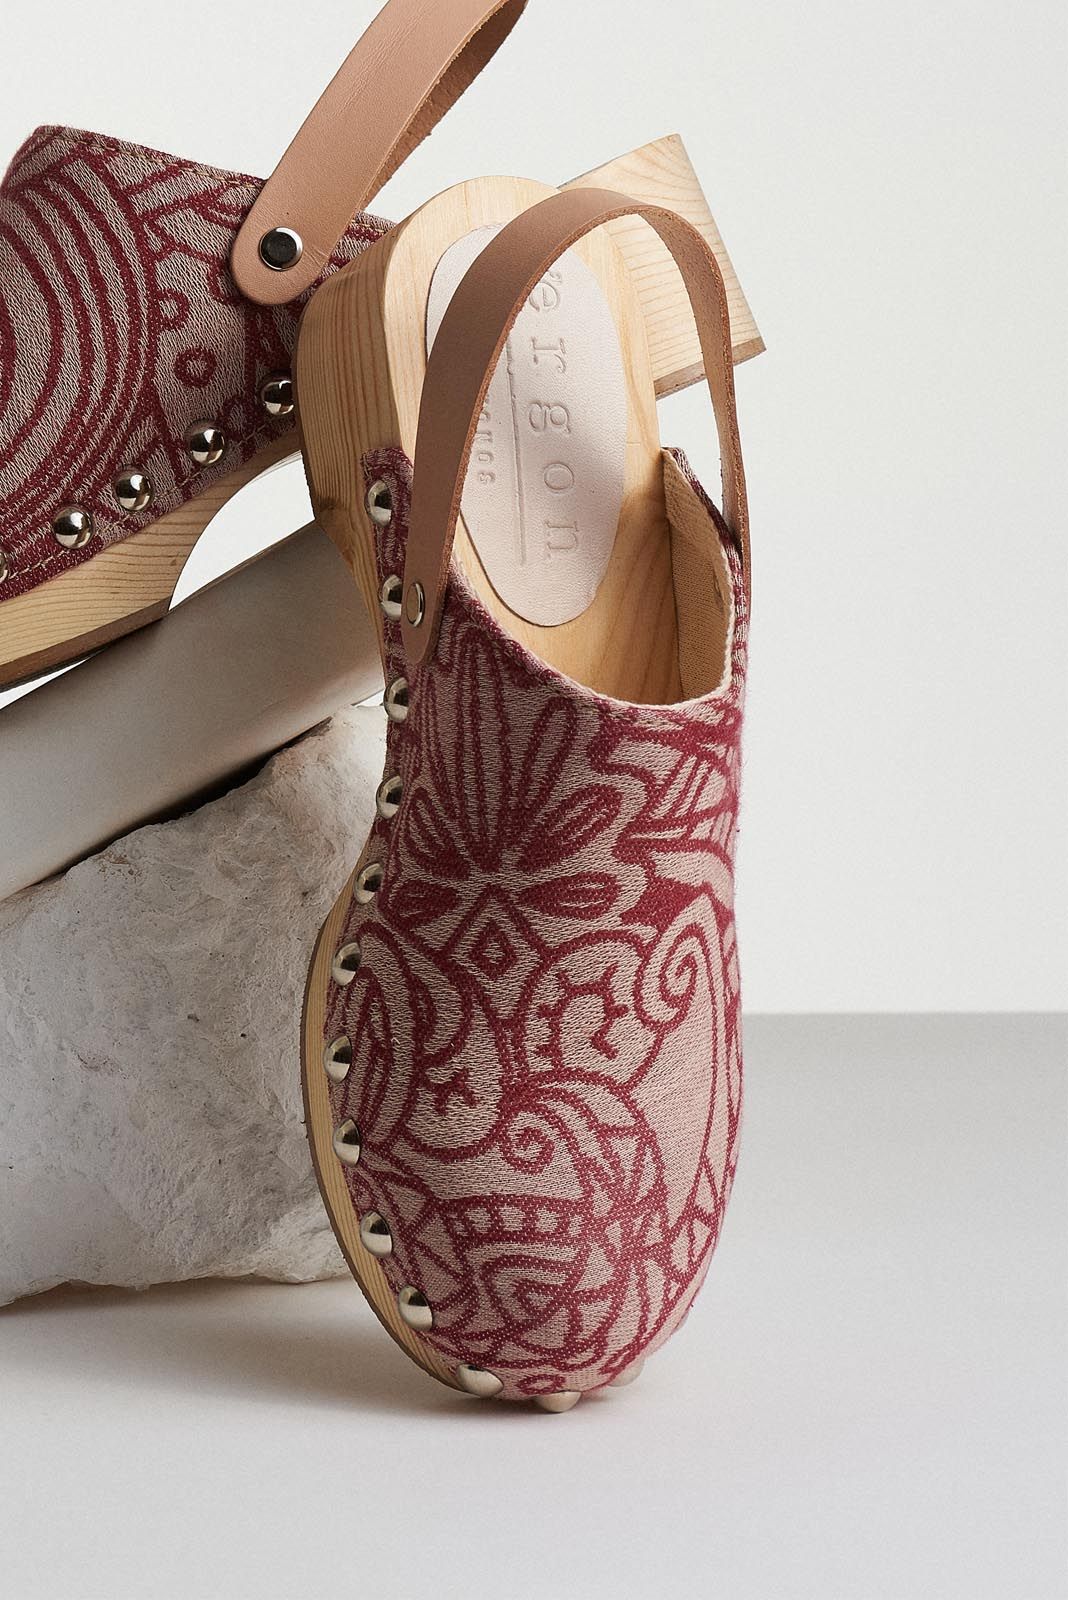 Clogs with wooven fabric